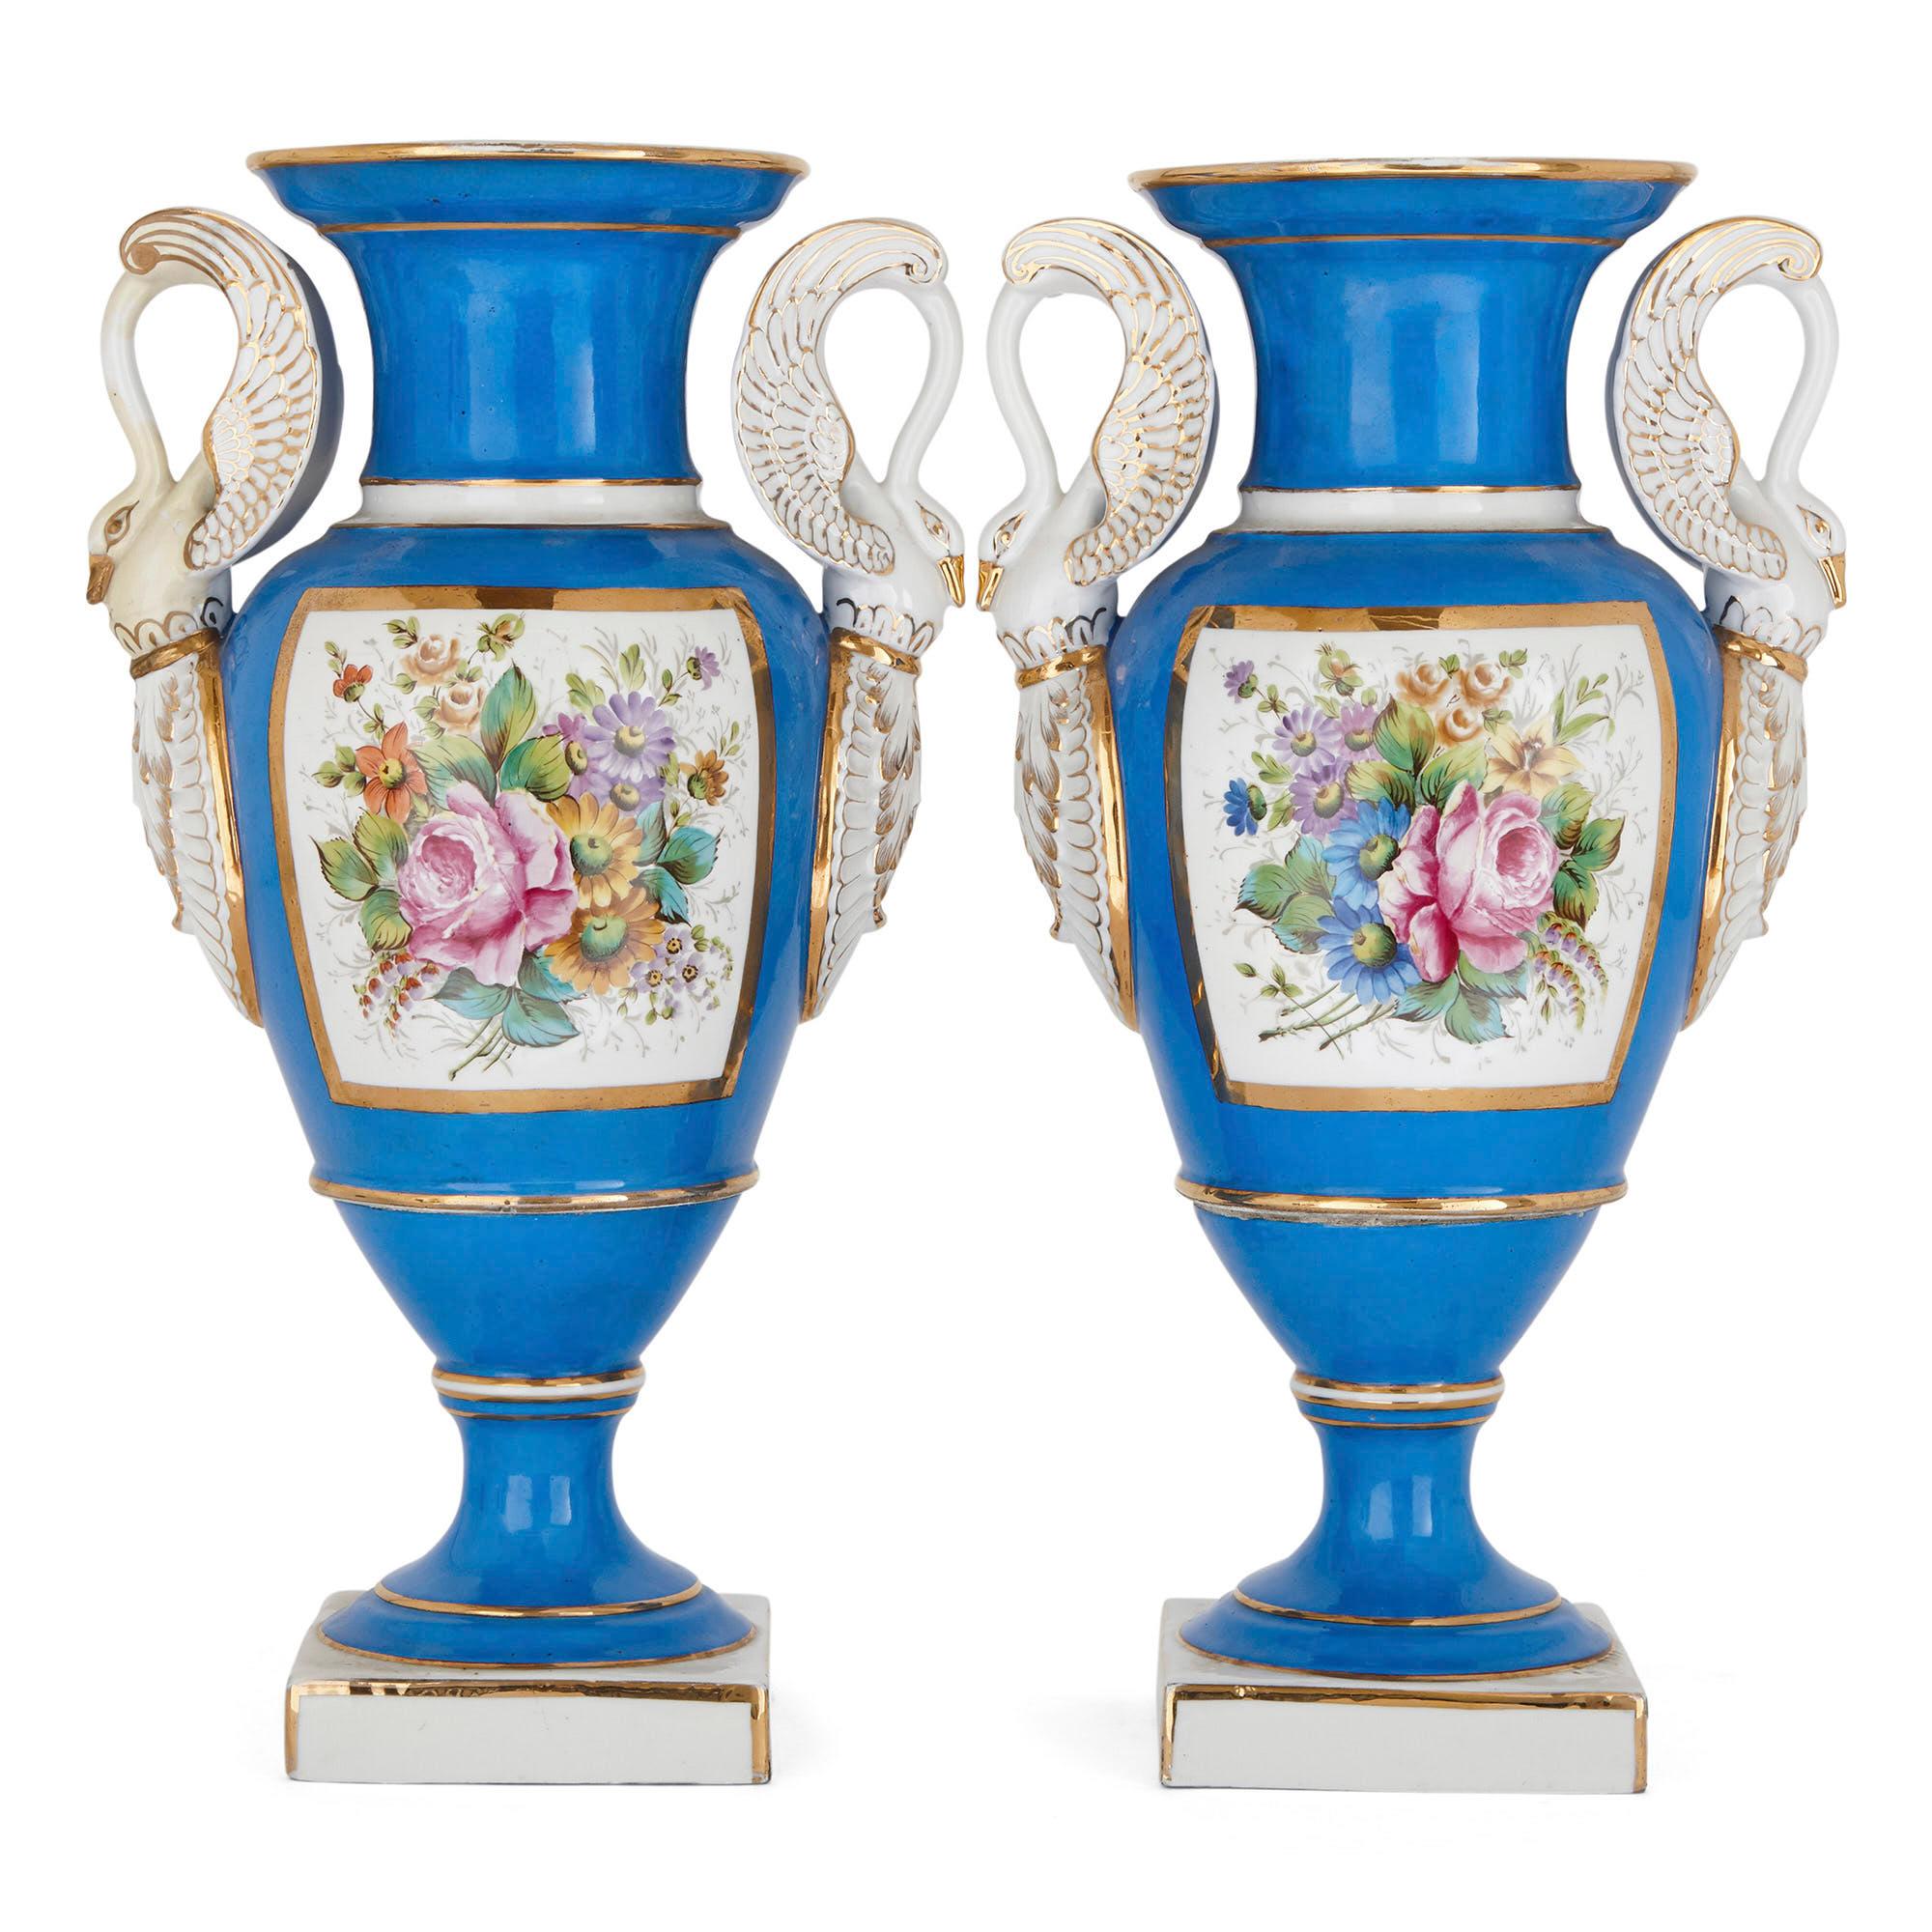 This pair of comprises pendant krater-shaped porcelain vases. Each vase’s wide-lipped ovoid body is supported by a flared stem, which stands on a square-sided podium. Most strikingly, each vase in the pair is mounted with two porcelain swan necked